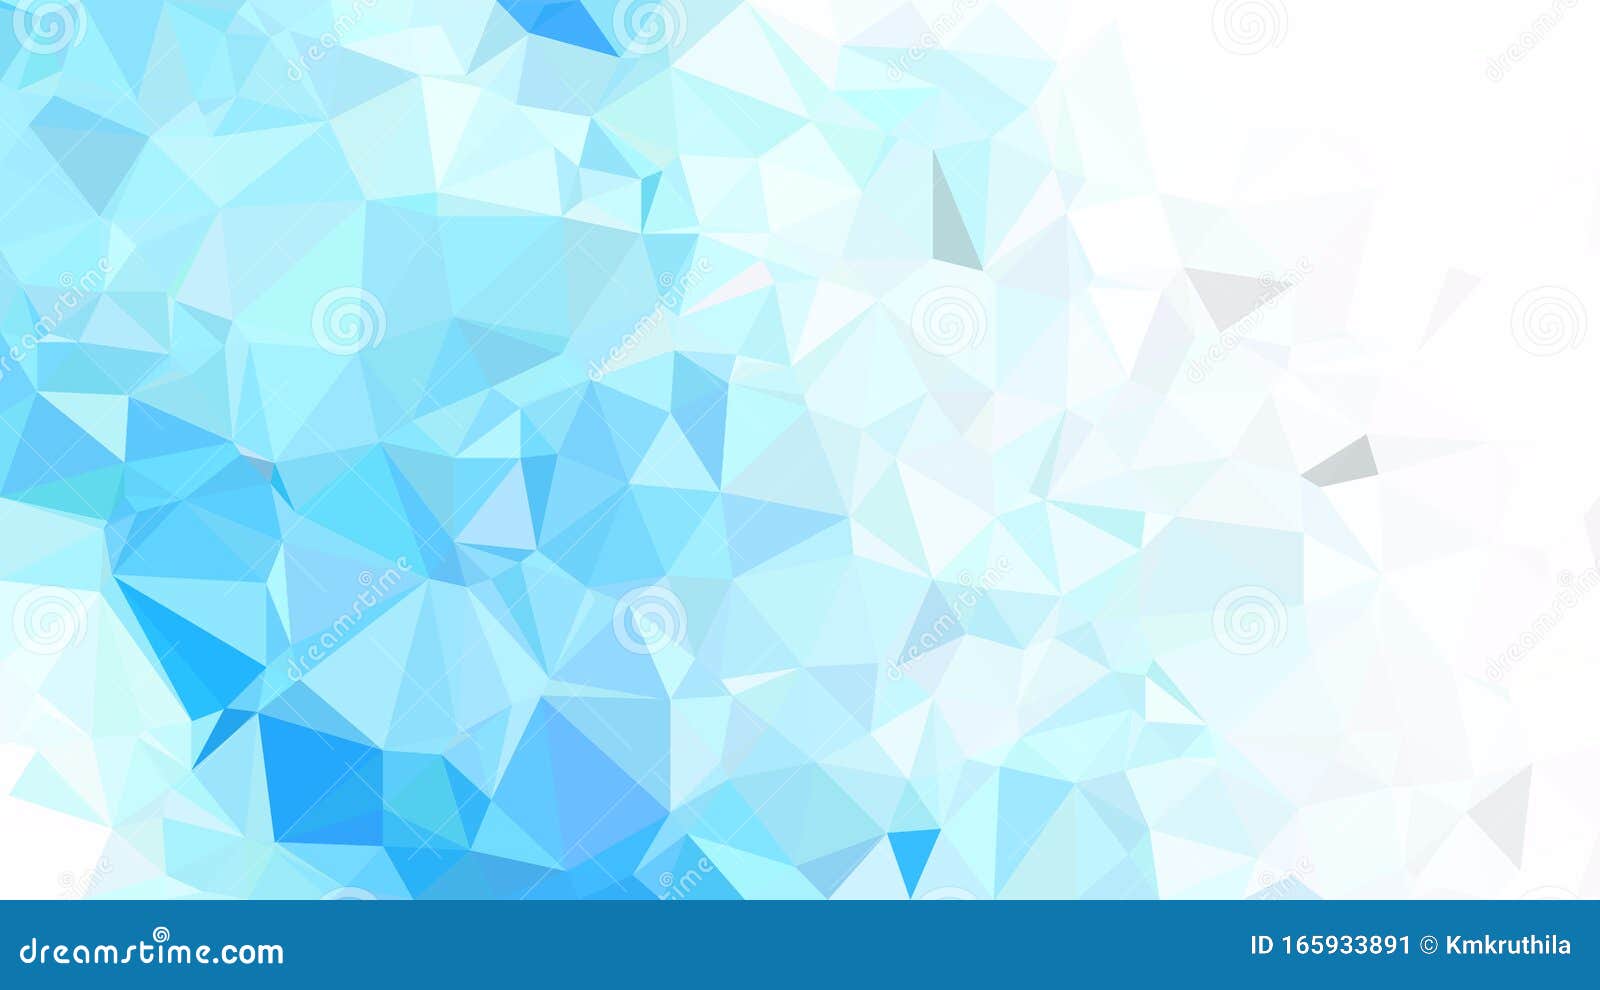 Abstract Blue And White Polygon Background Graphic Design Vector Image Stock Vector